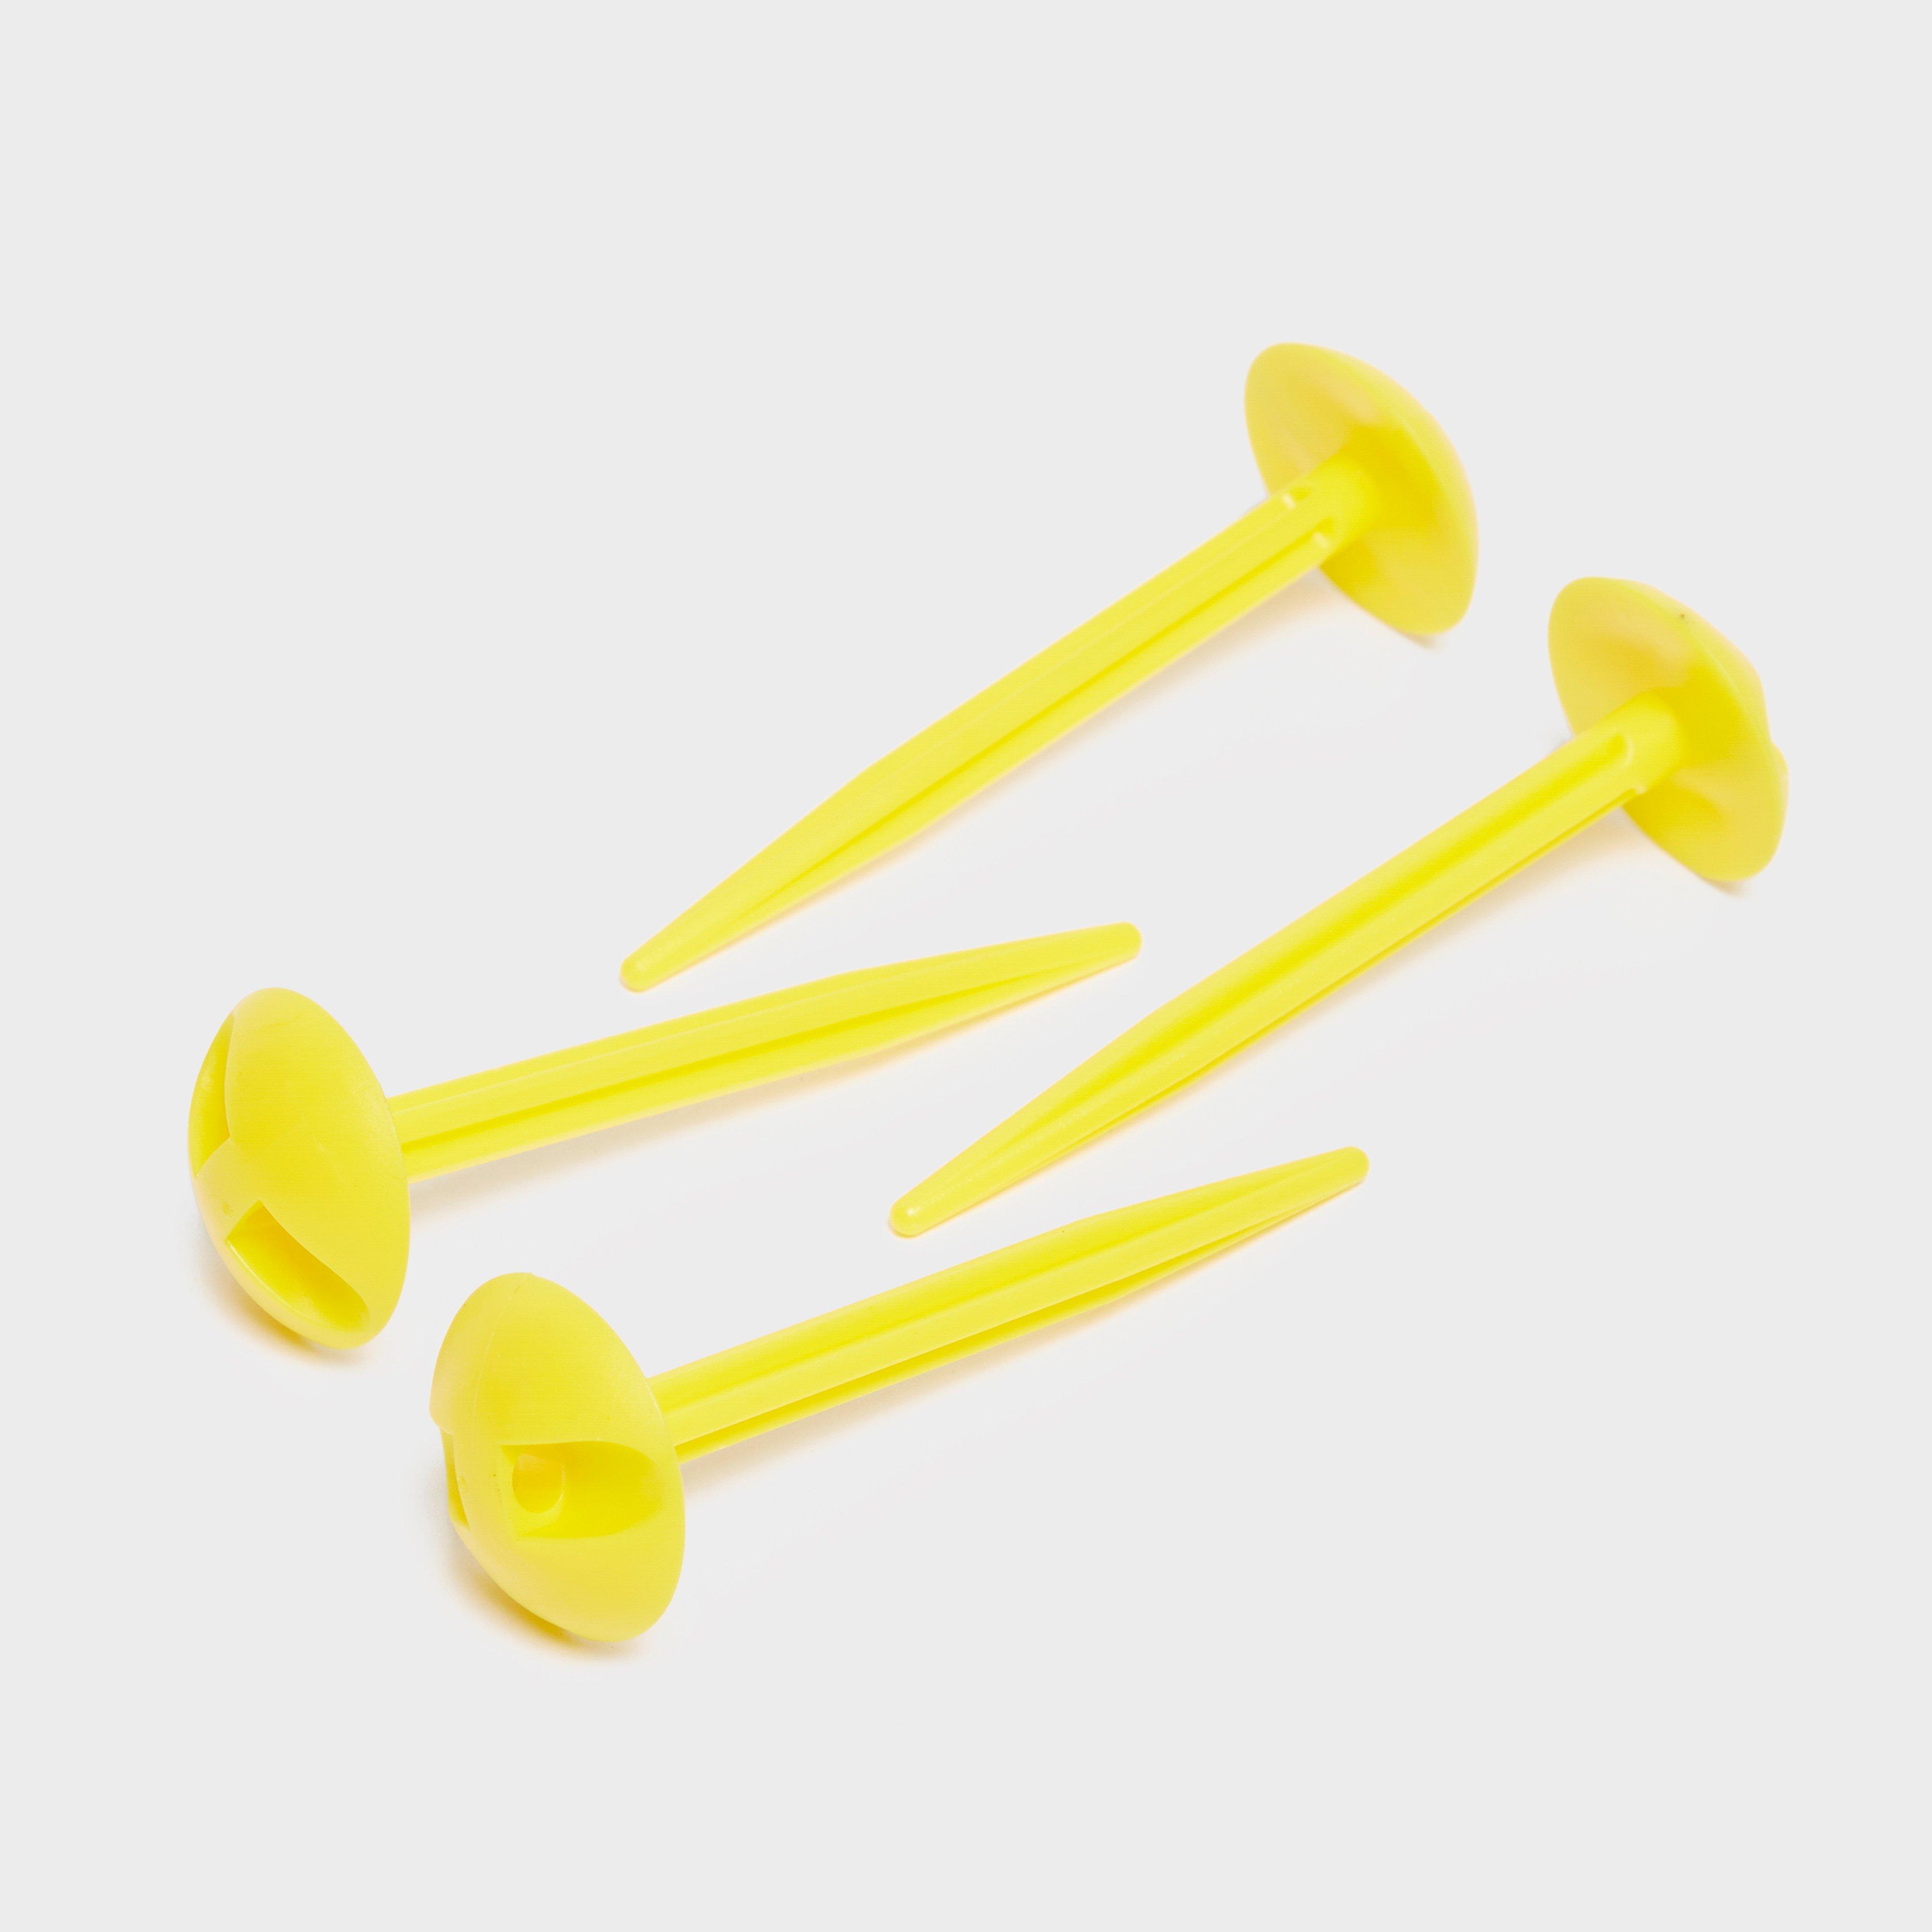 Photos - Other goods for tourism Hi-Gear Groundsheet Pegs , Yellow (8cm)